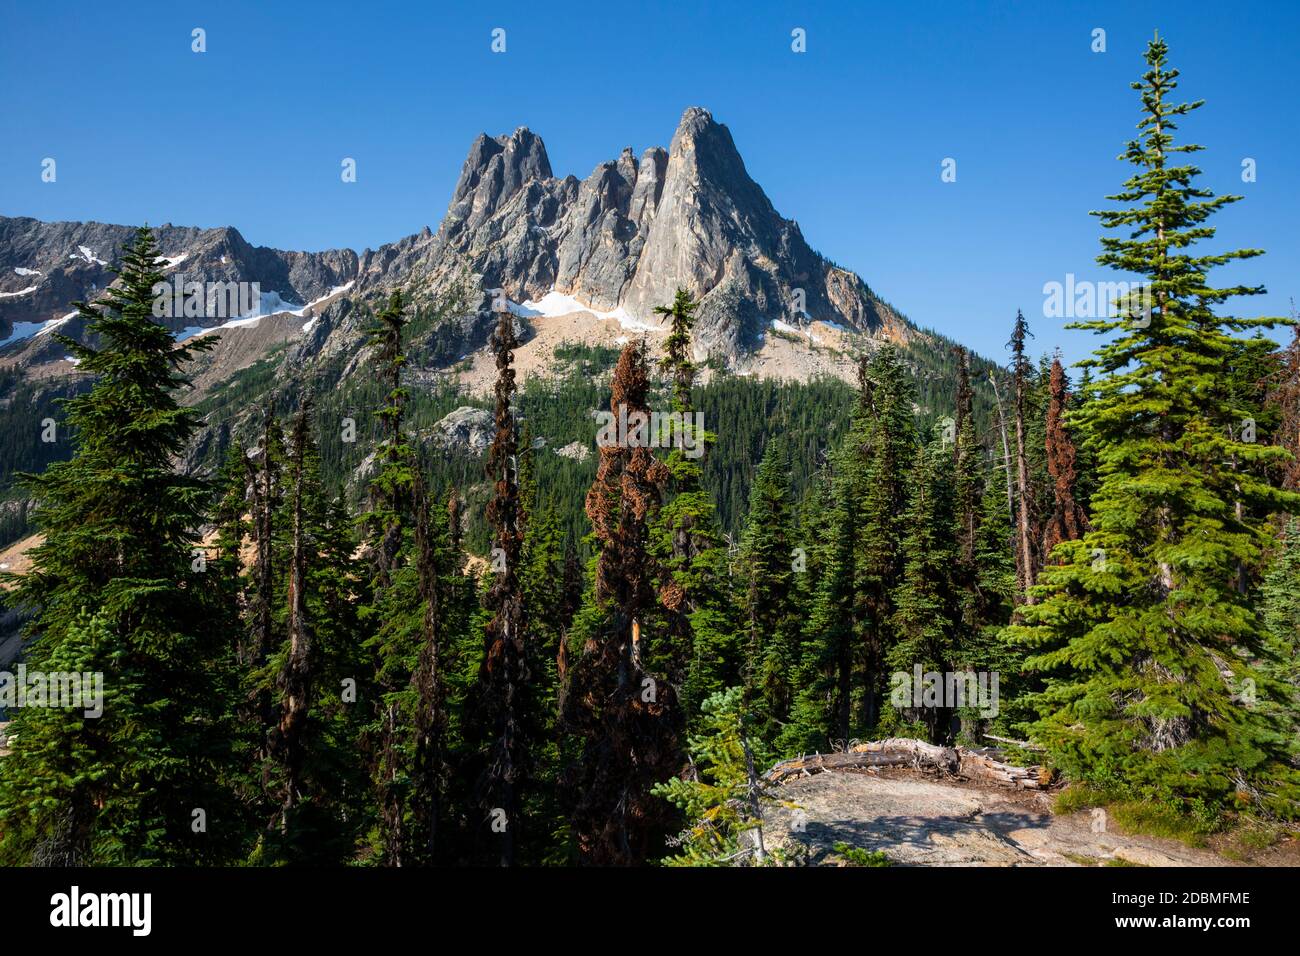 WA18162-00...WASHINGTON - View of Libery Bell and the Early Winters Spires from the Washington Pass Overlook on the North Cascades Scenic Byway. Stock Photo